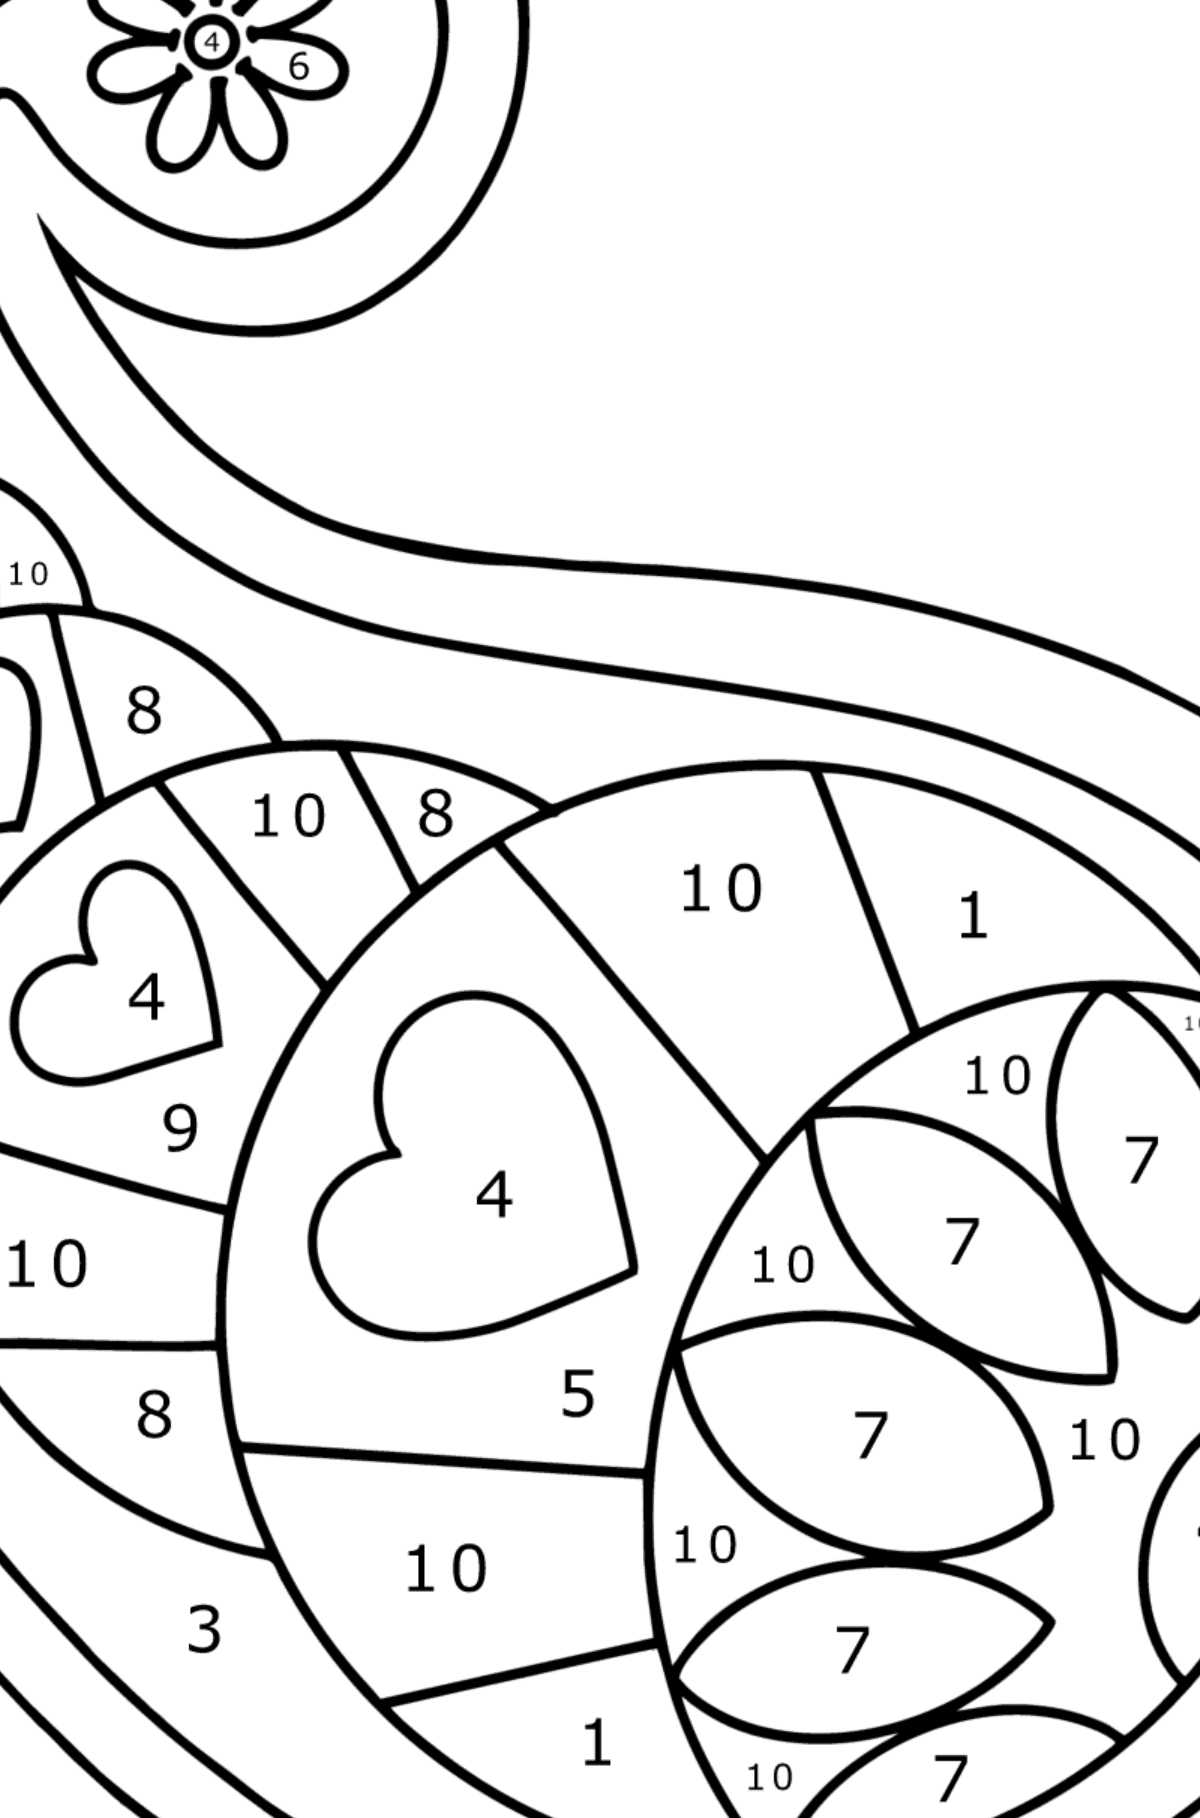 Paisley design coloring page - Coloring by Numbers for Kids